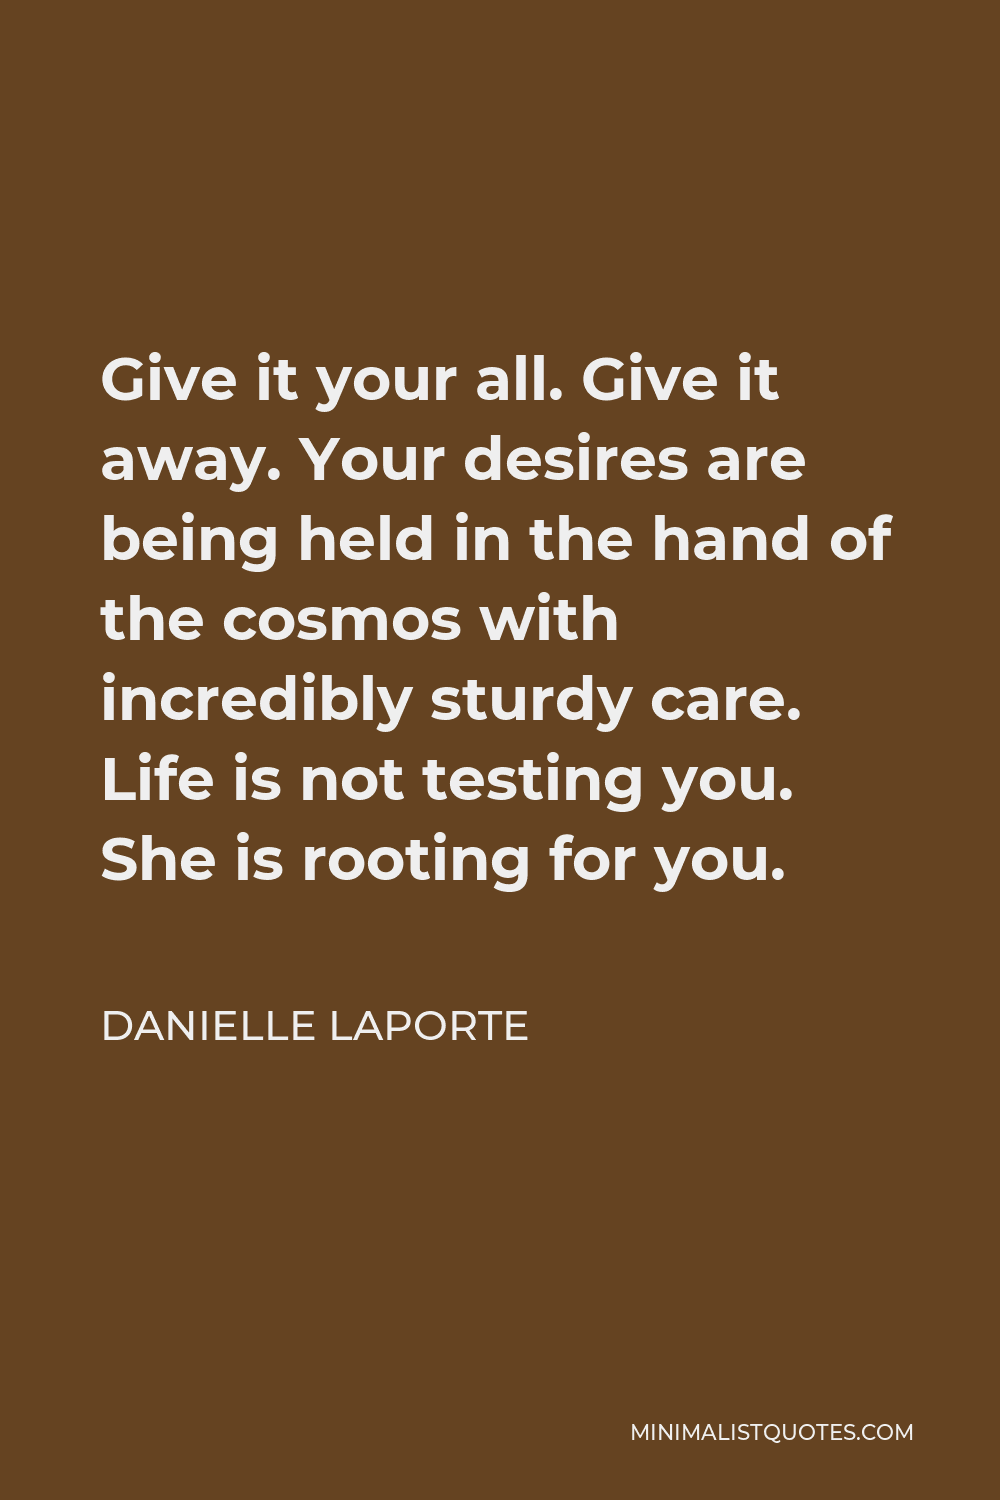 Danielle LaPorte Quote - Give it your all. Give it away. Your desires are being held in the hand of the cosmos with incredibly sturdy care. Life is not testing you. She is rooting for you.